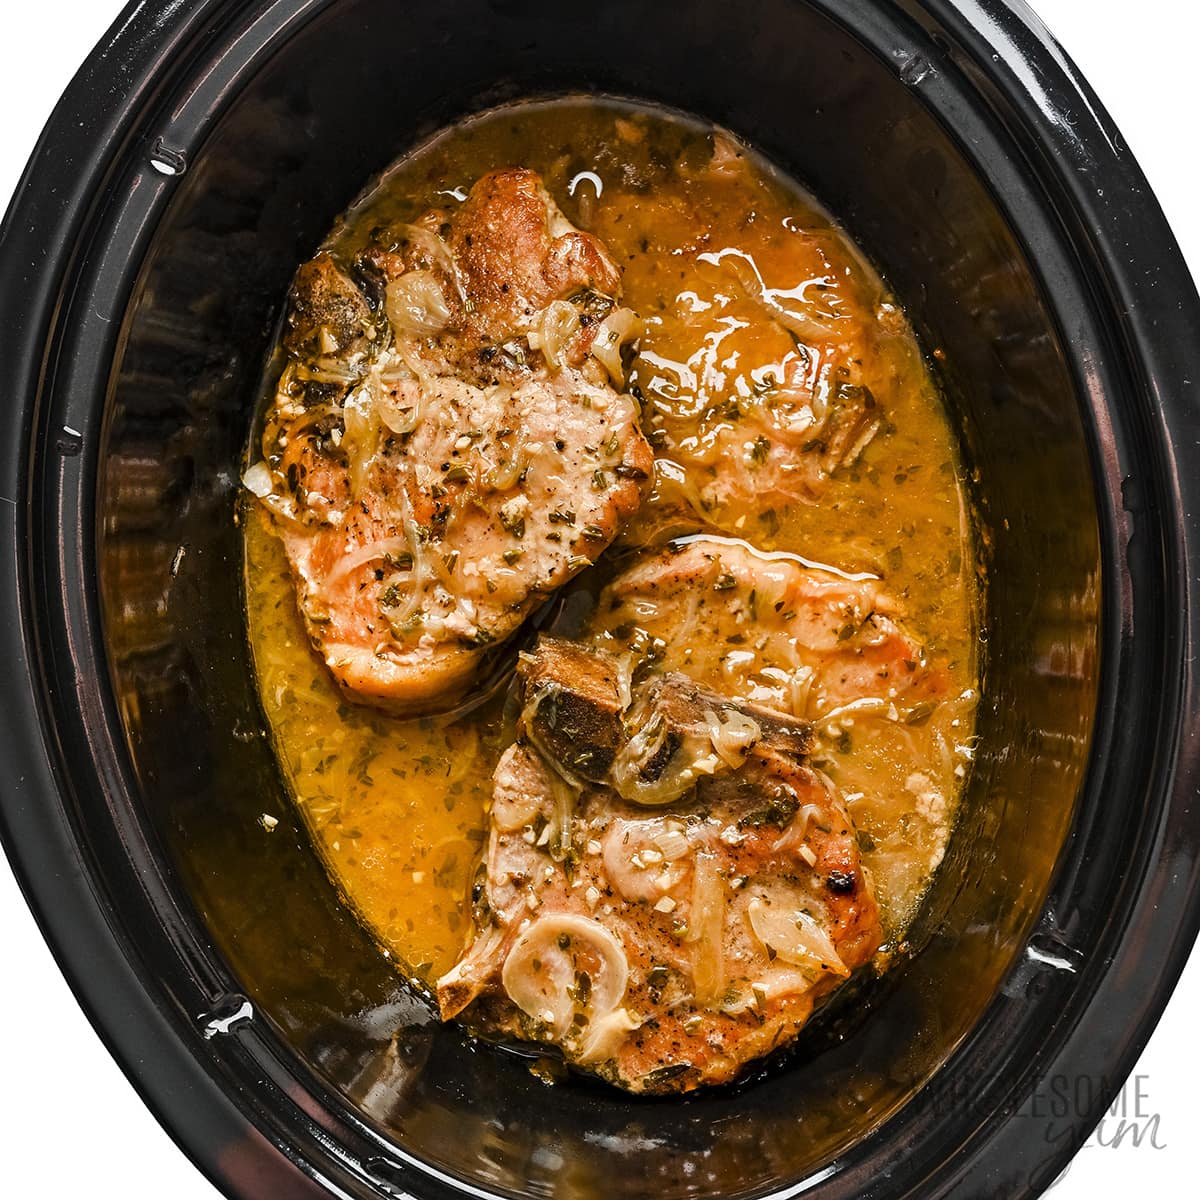 Cooked pork chops in the Crock Pot.